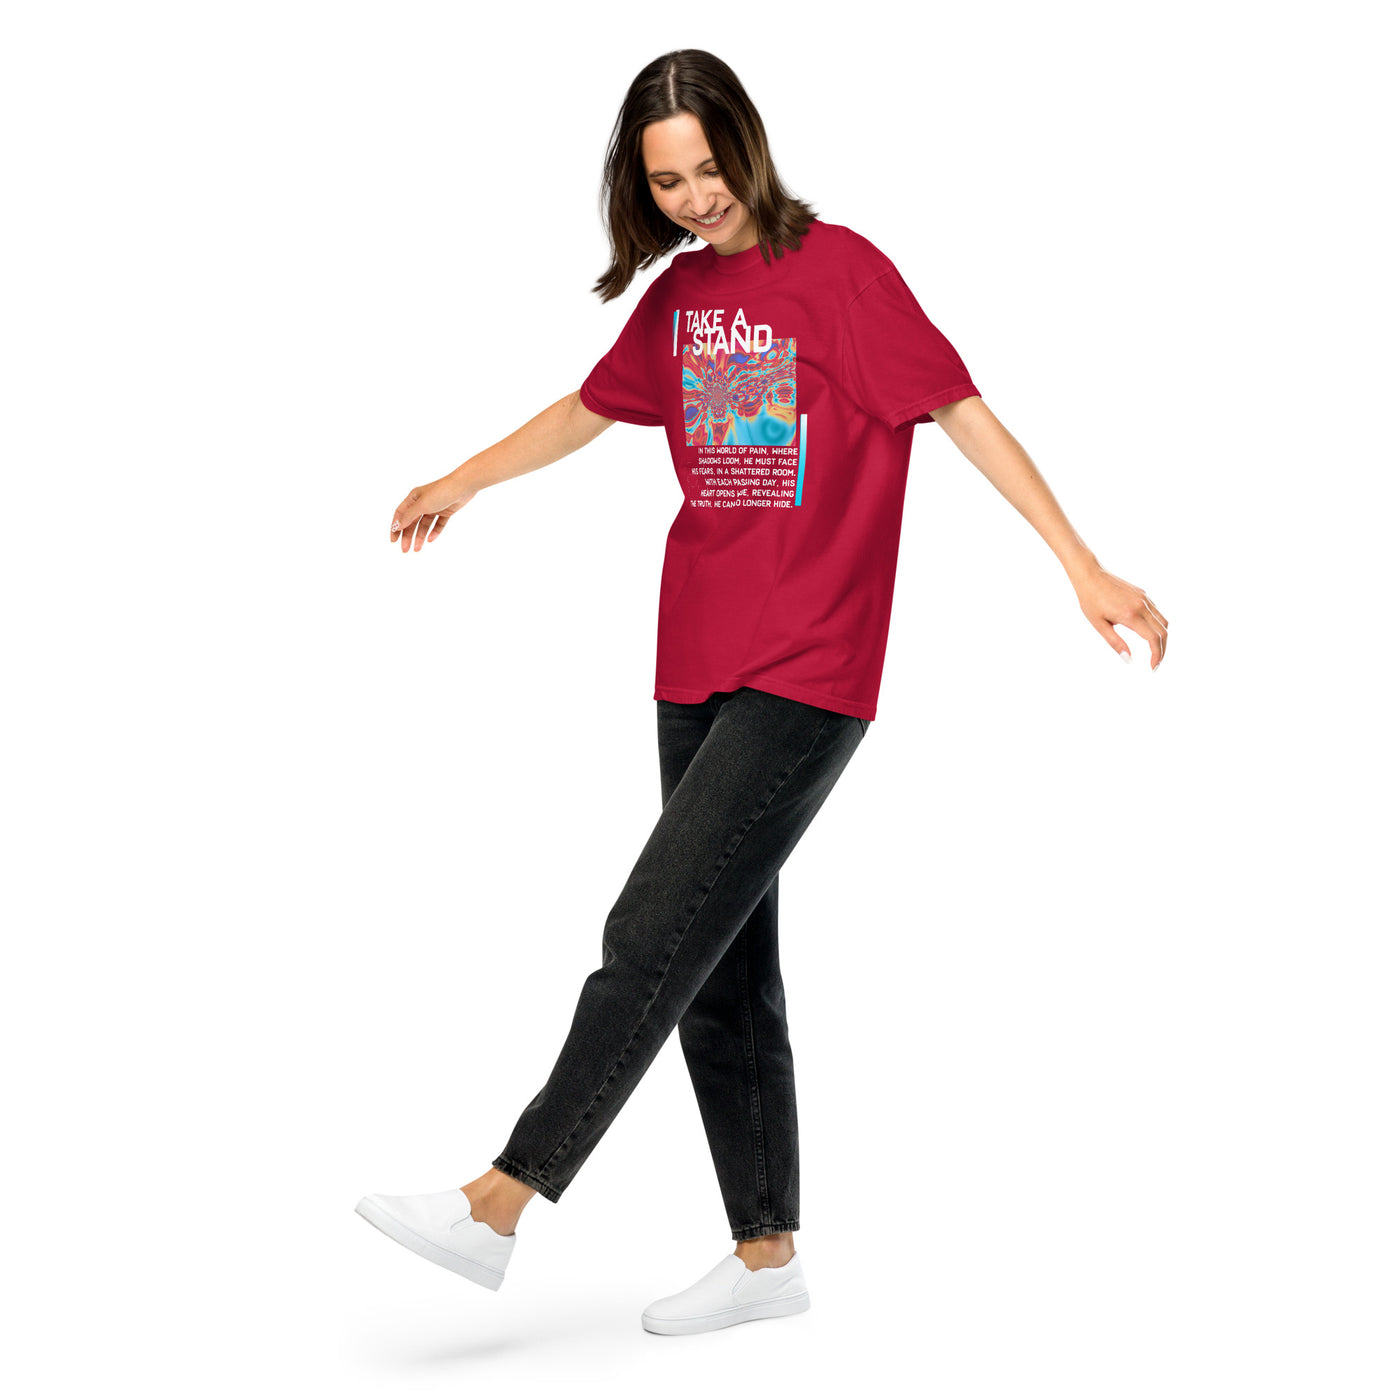 Take a Stand Oversized T-Shirt